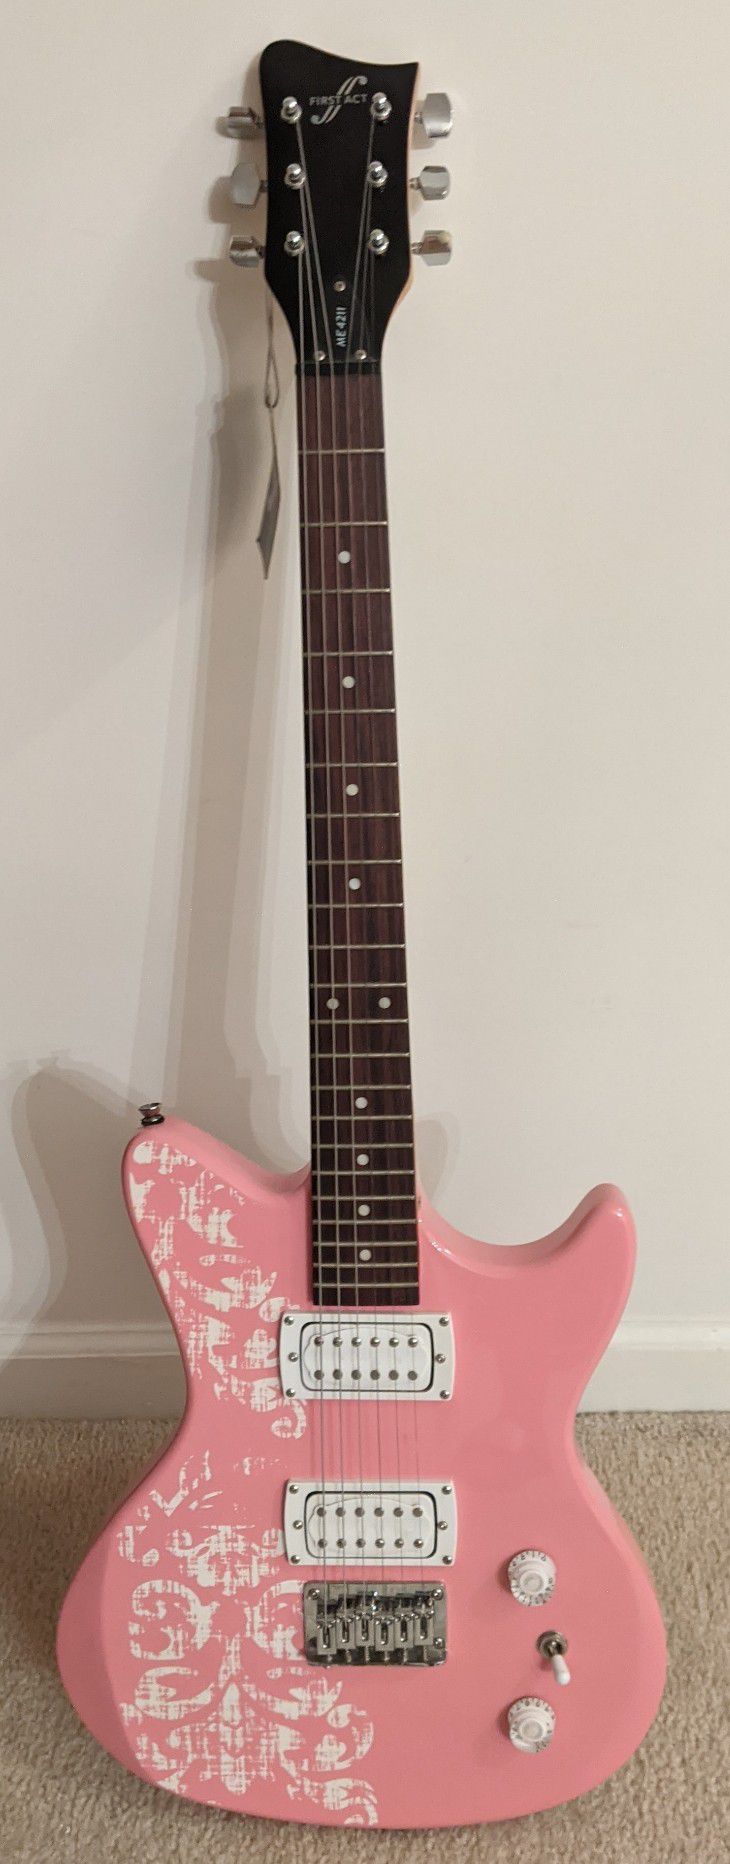 FIRST ACT PINK ELECTRIC GUITAR